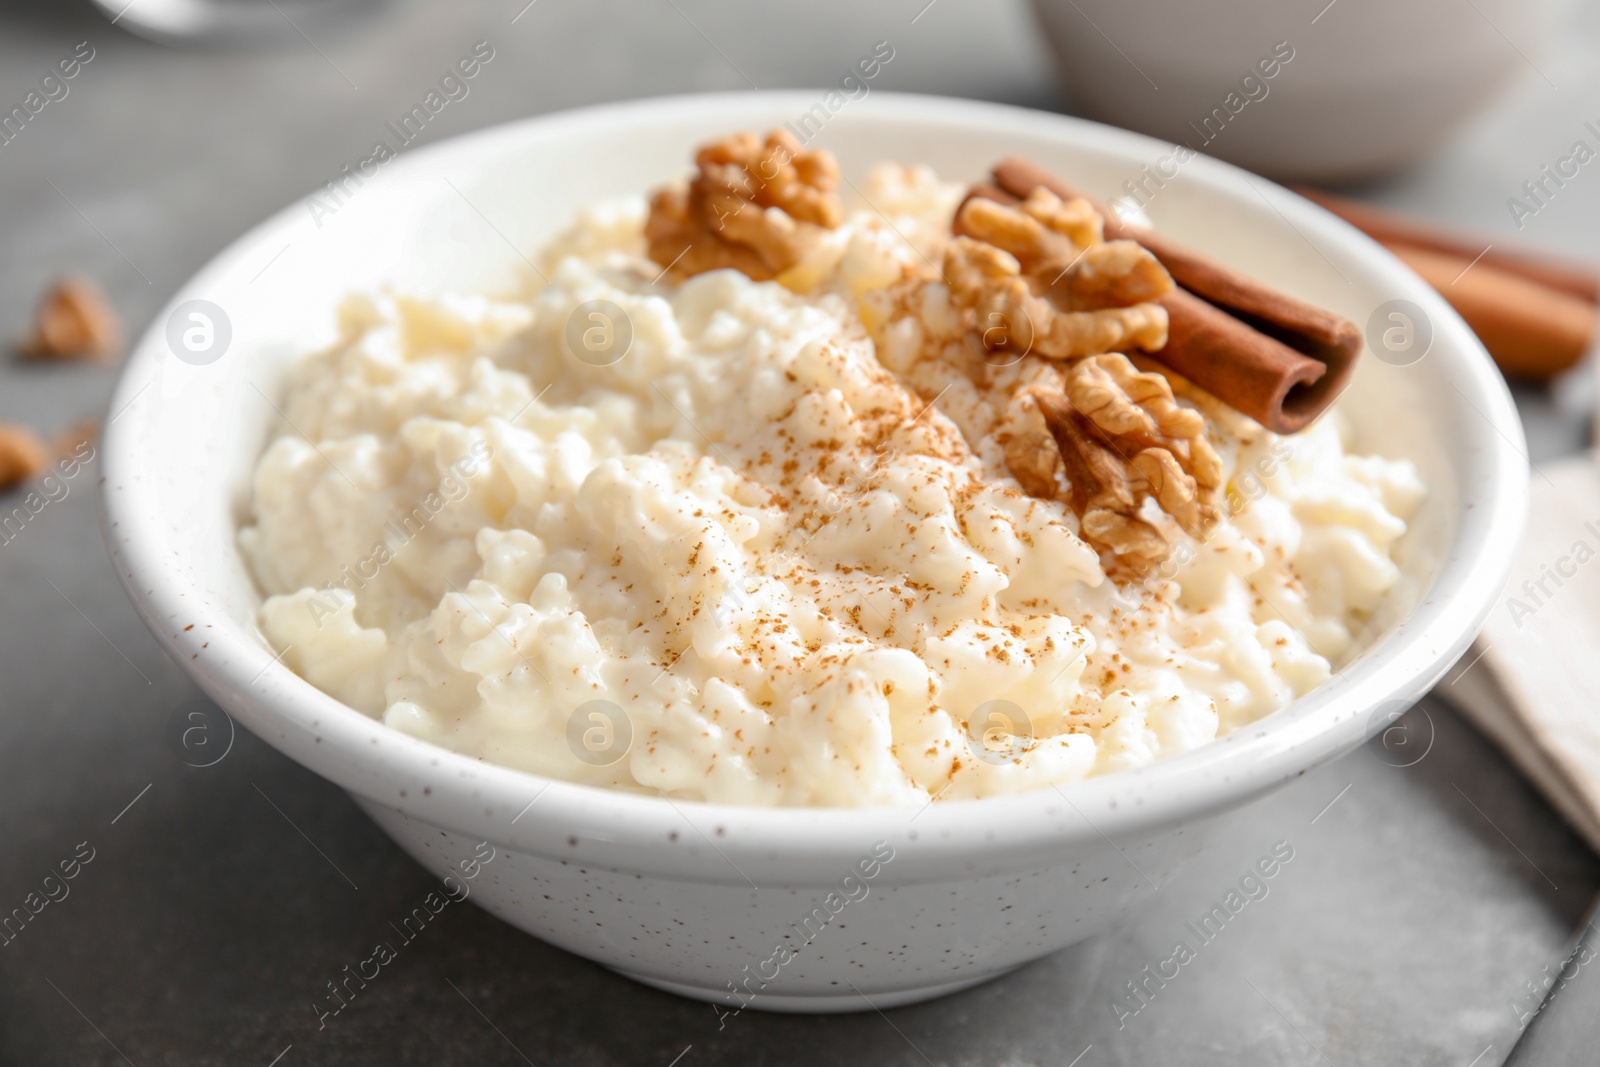 Photo of Creamy rice pudding with cinnamon and walnuts in bowl on grey table